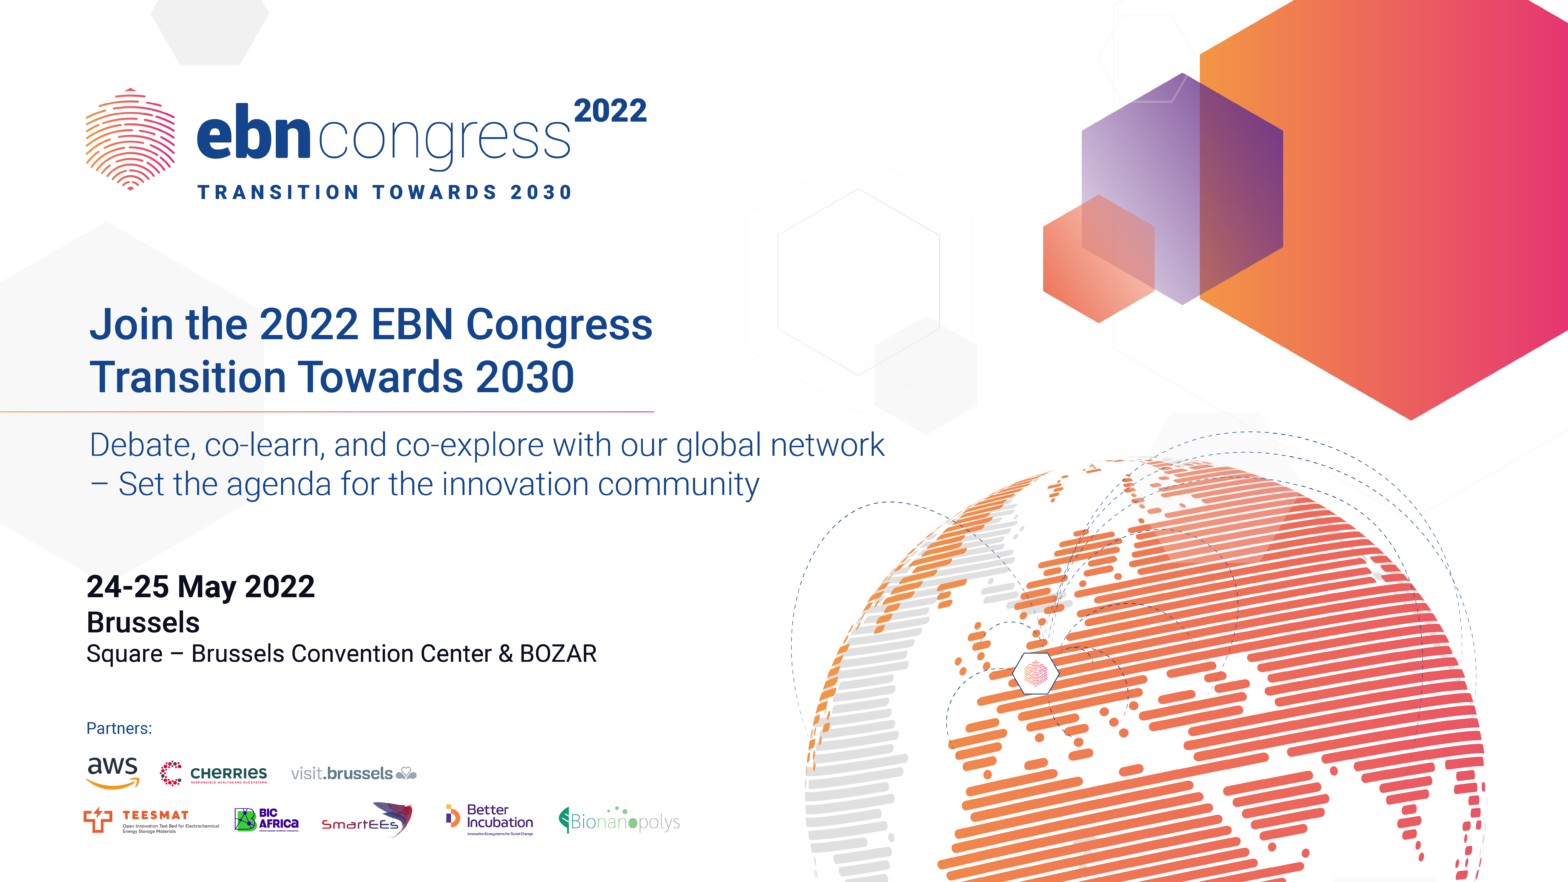 EBN 2022 Congress Panel on Innovation Community Growth : powered by the Better Incubation